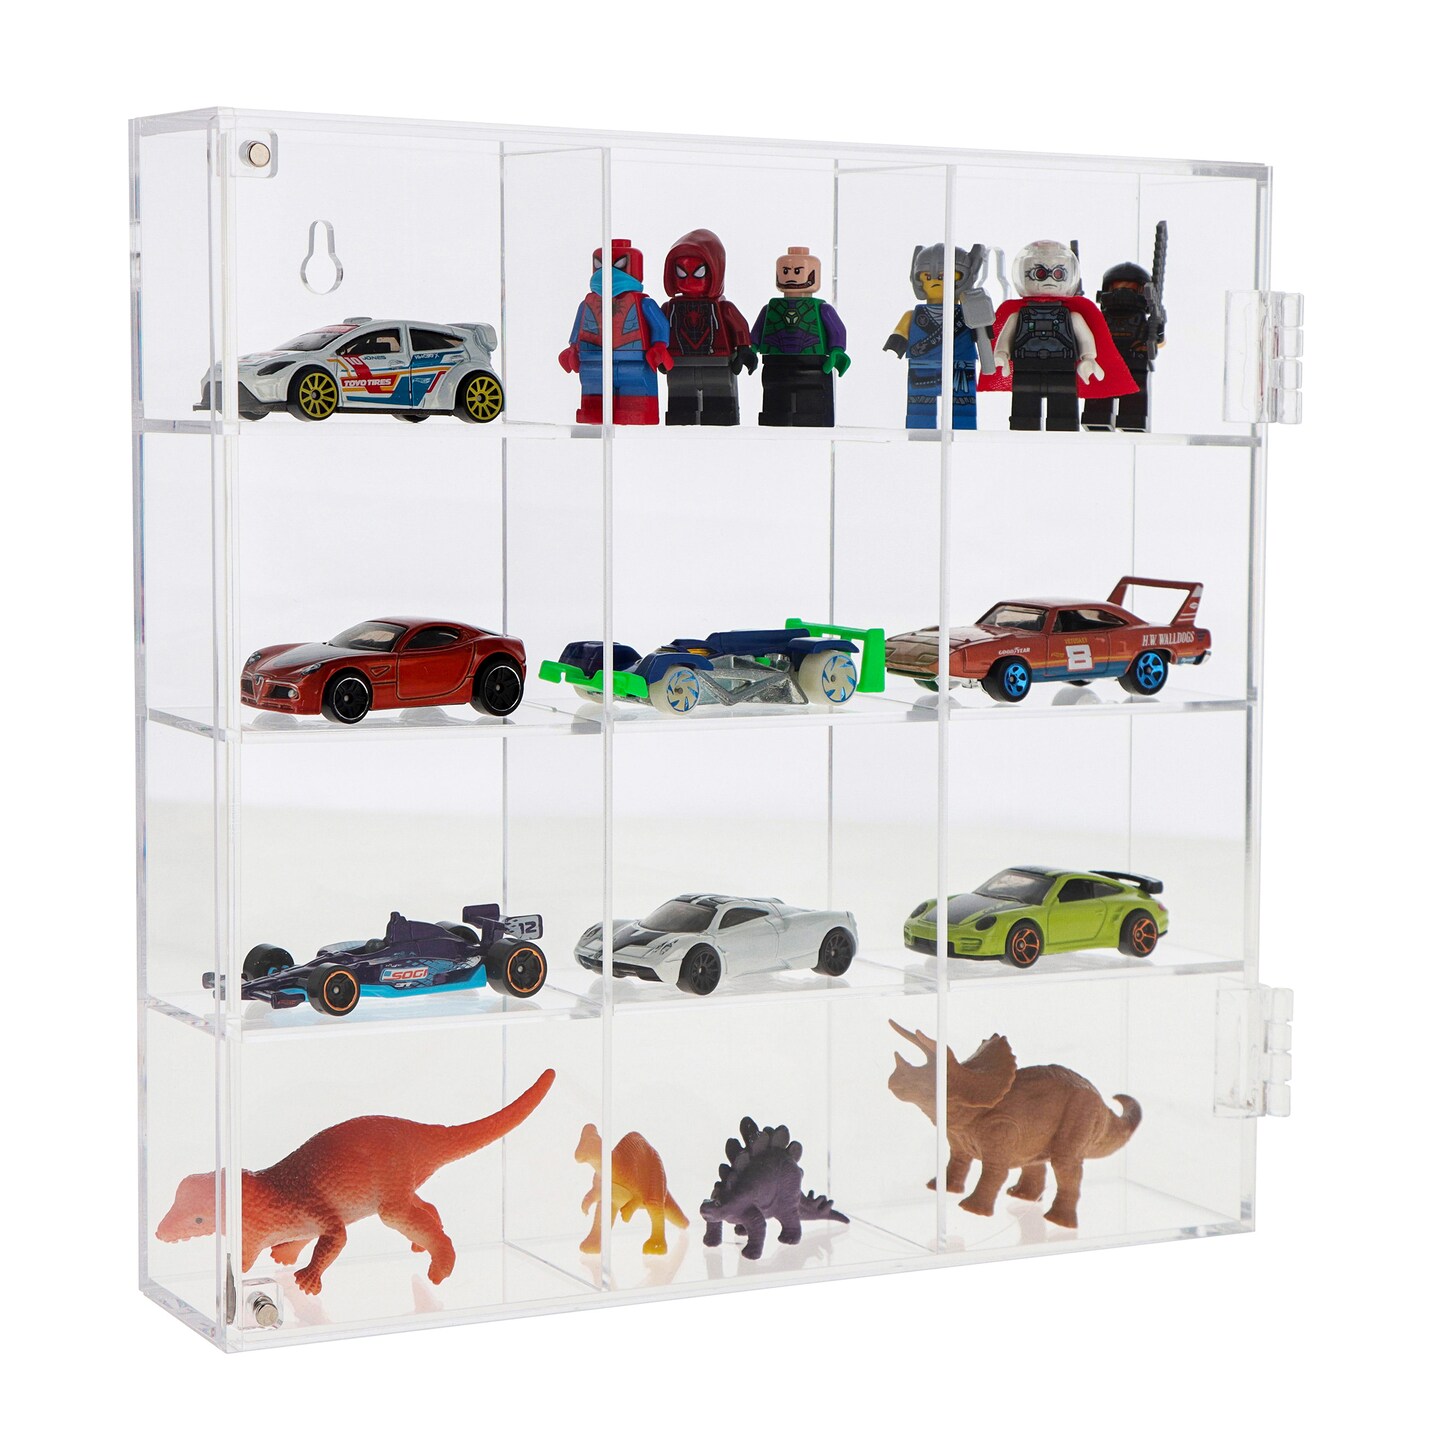 7Penn Standing 10 x 10.7in Acrylic Small Figurine Display Shelf for Collectibles